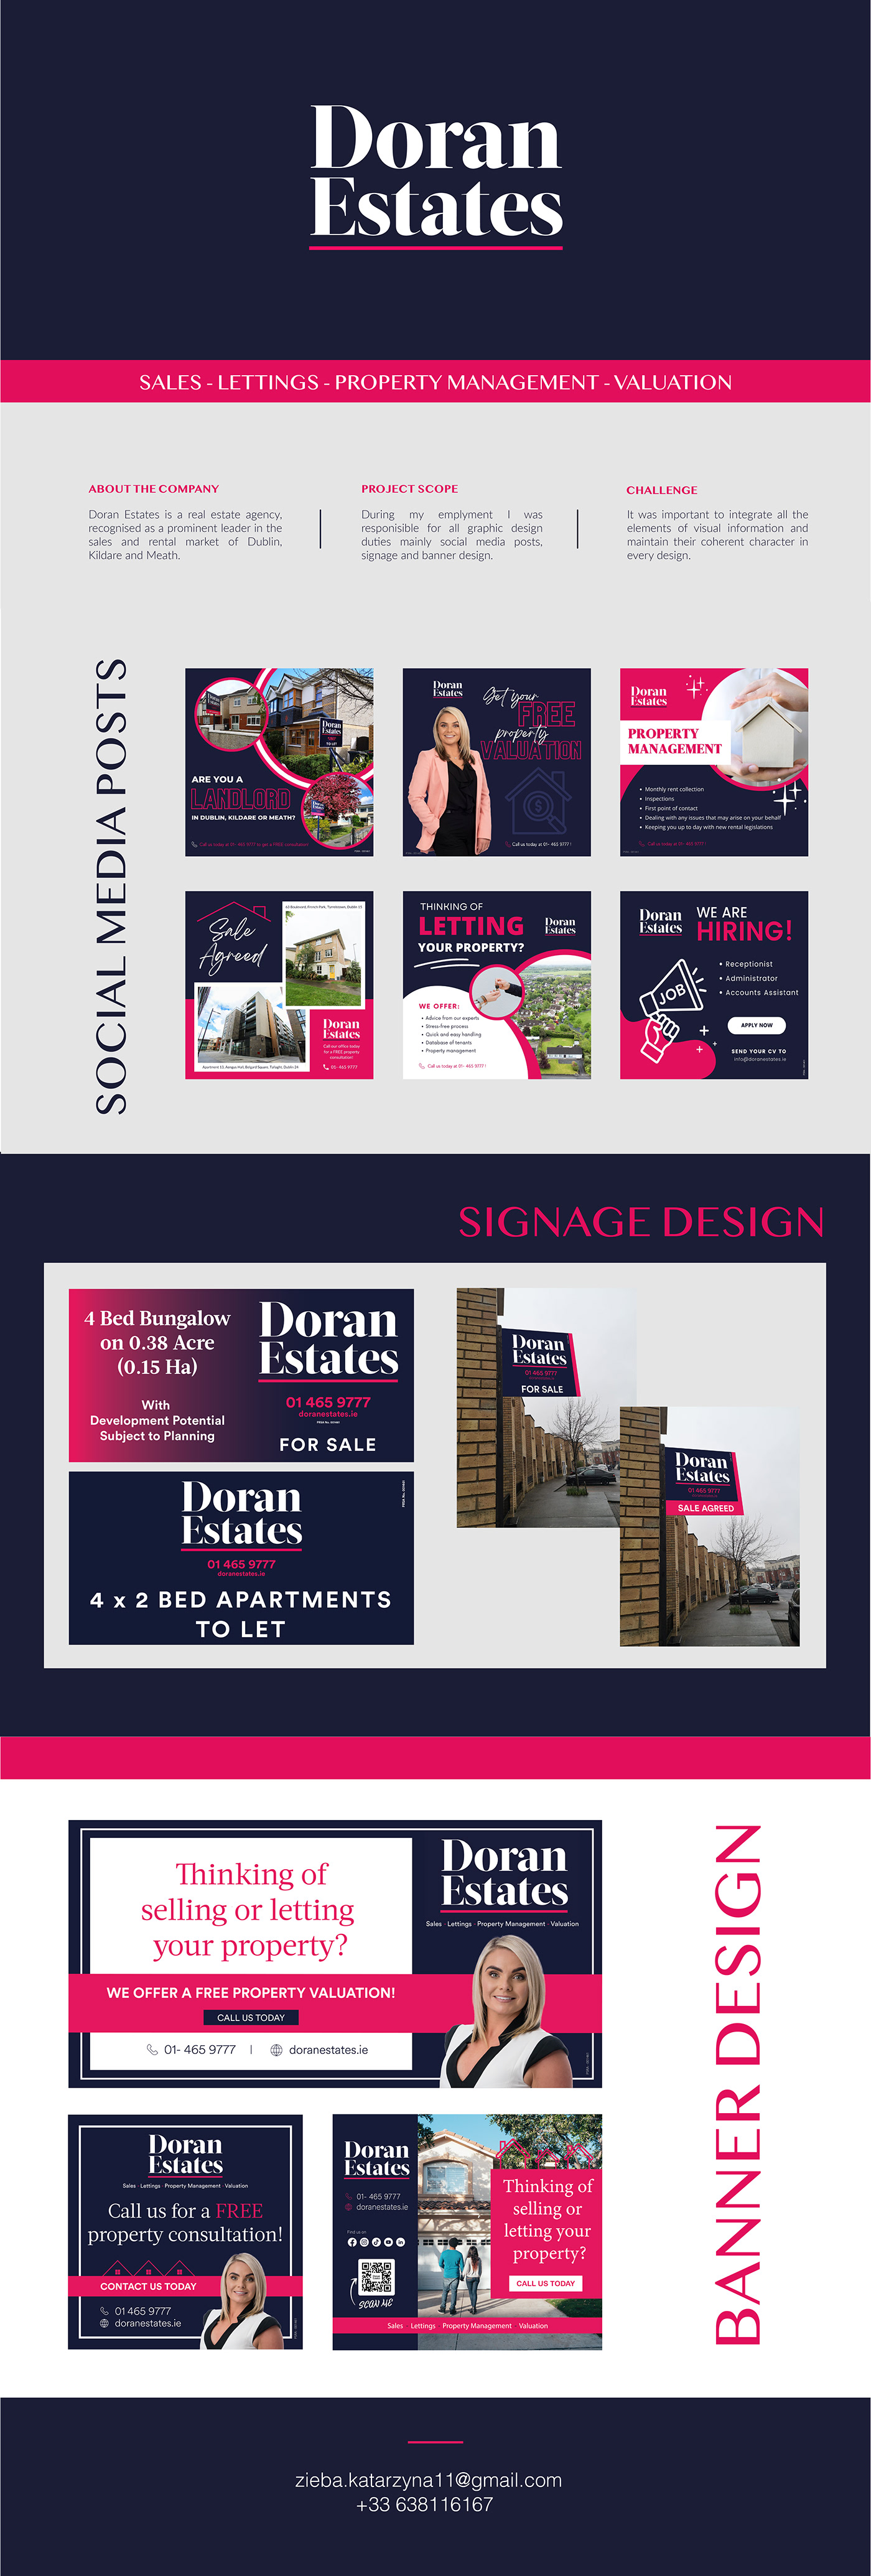 Branding for real estate company including social media posts, banners and signage